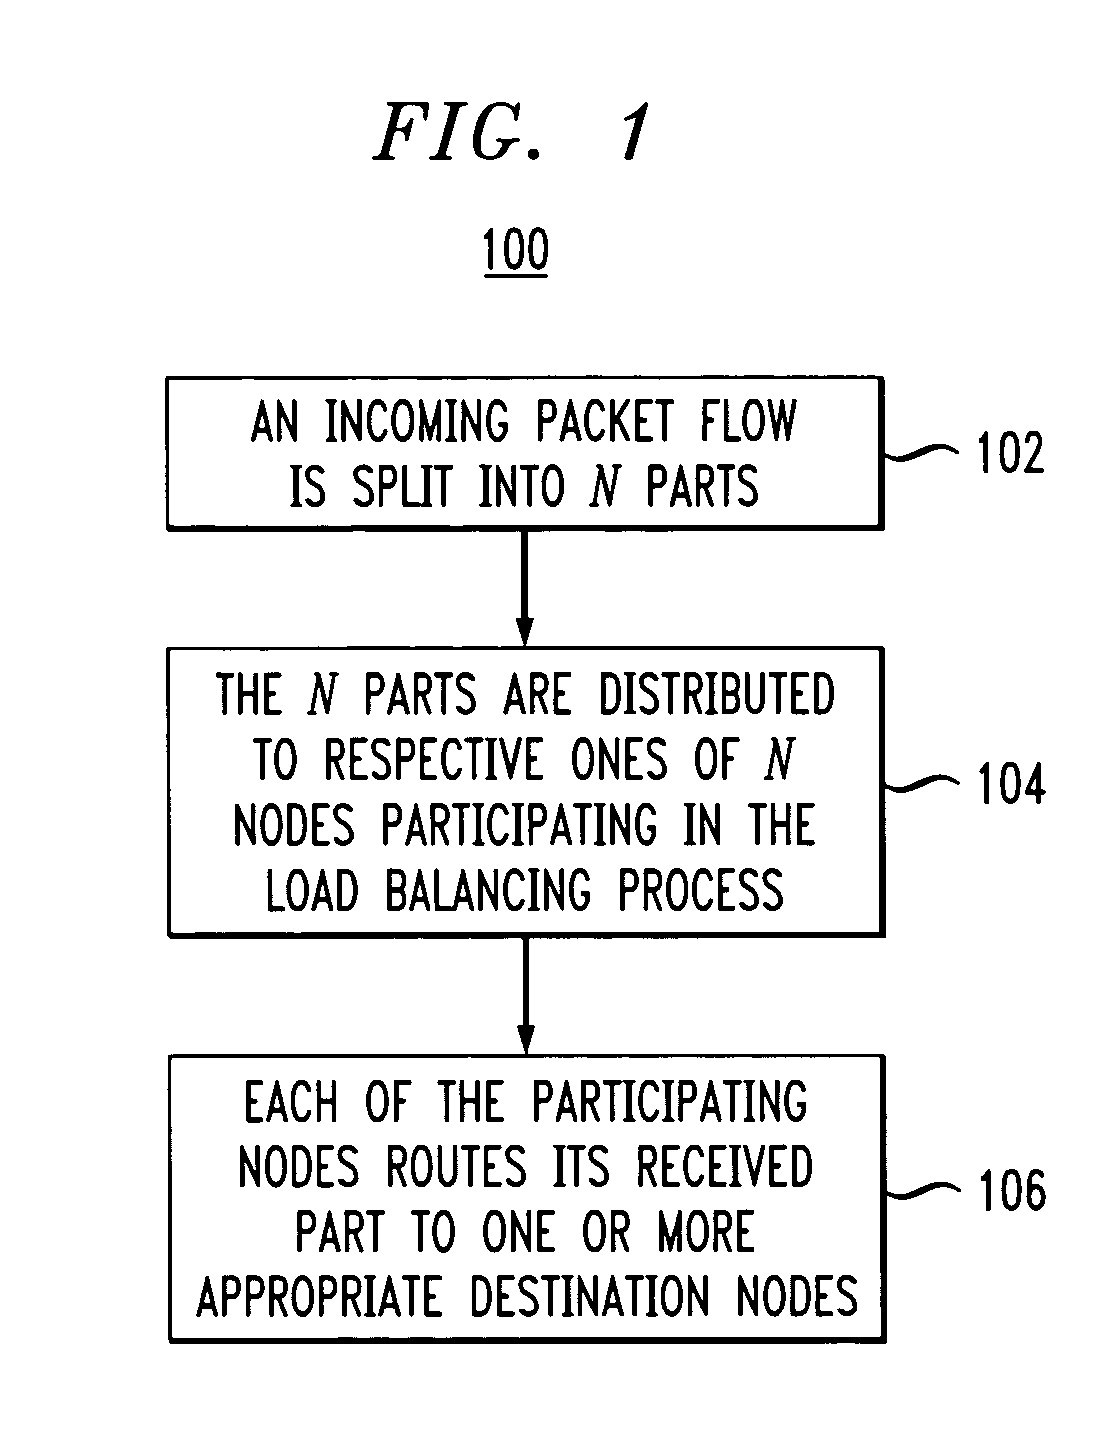 Packet reorder resolution in a load-balanced network architecture